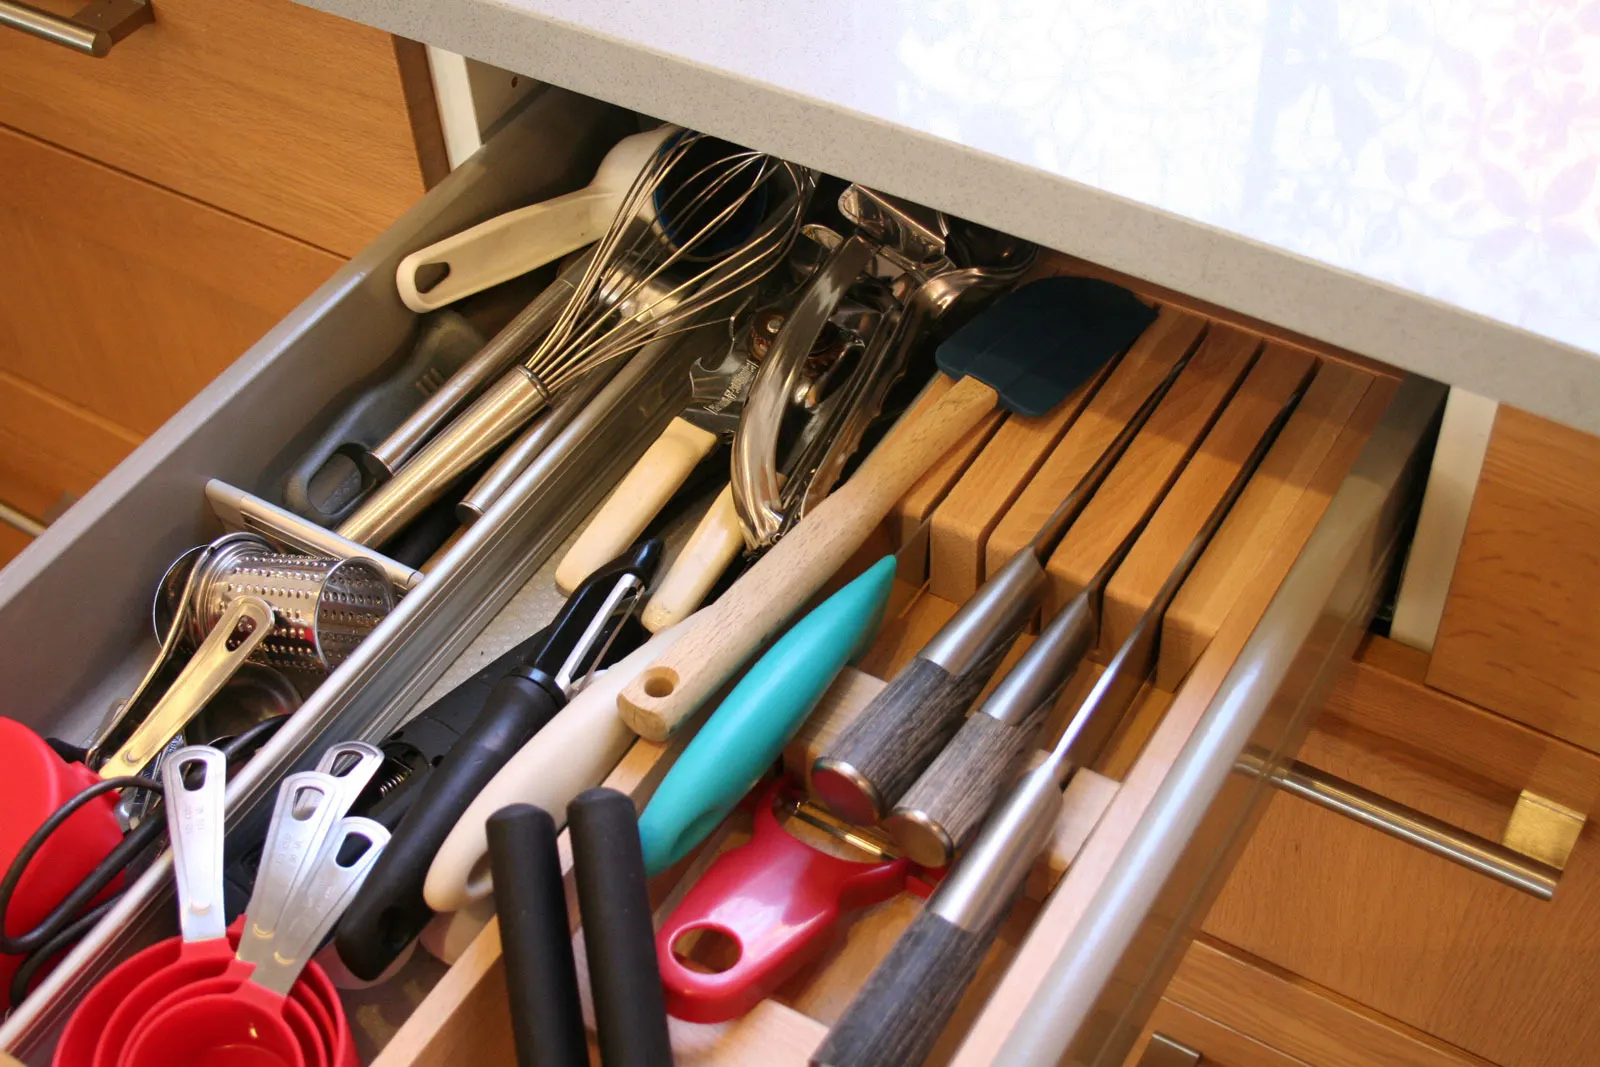 How To Store Cooking Utensils